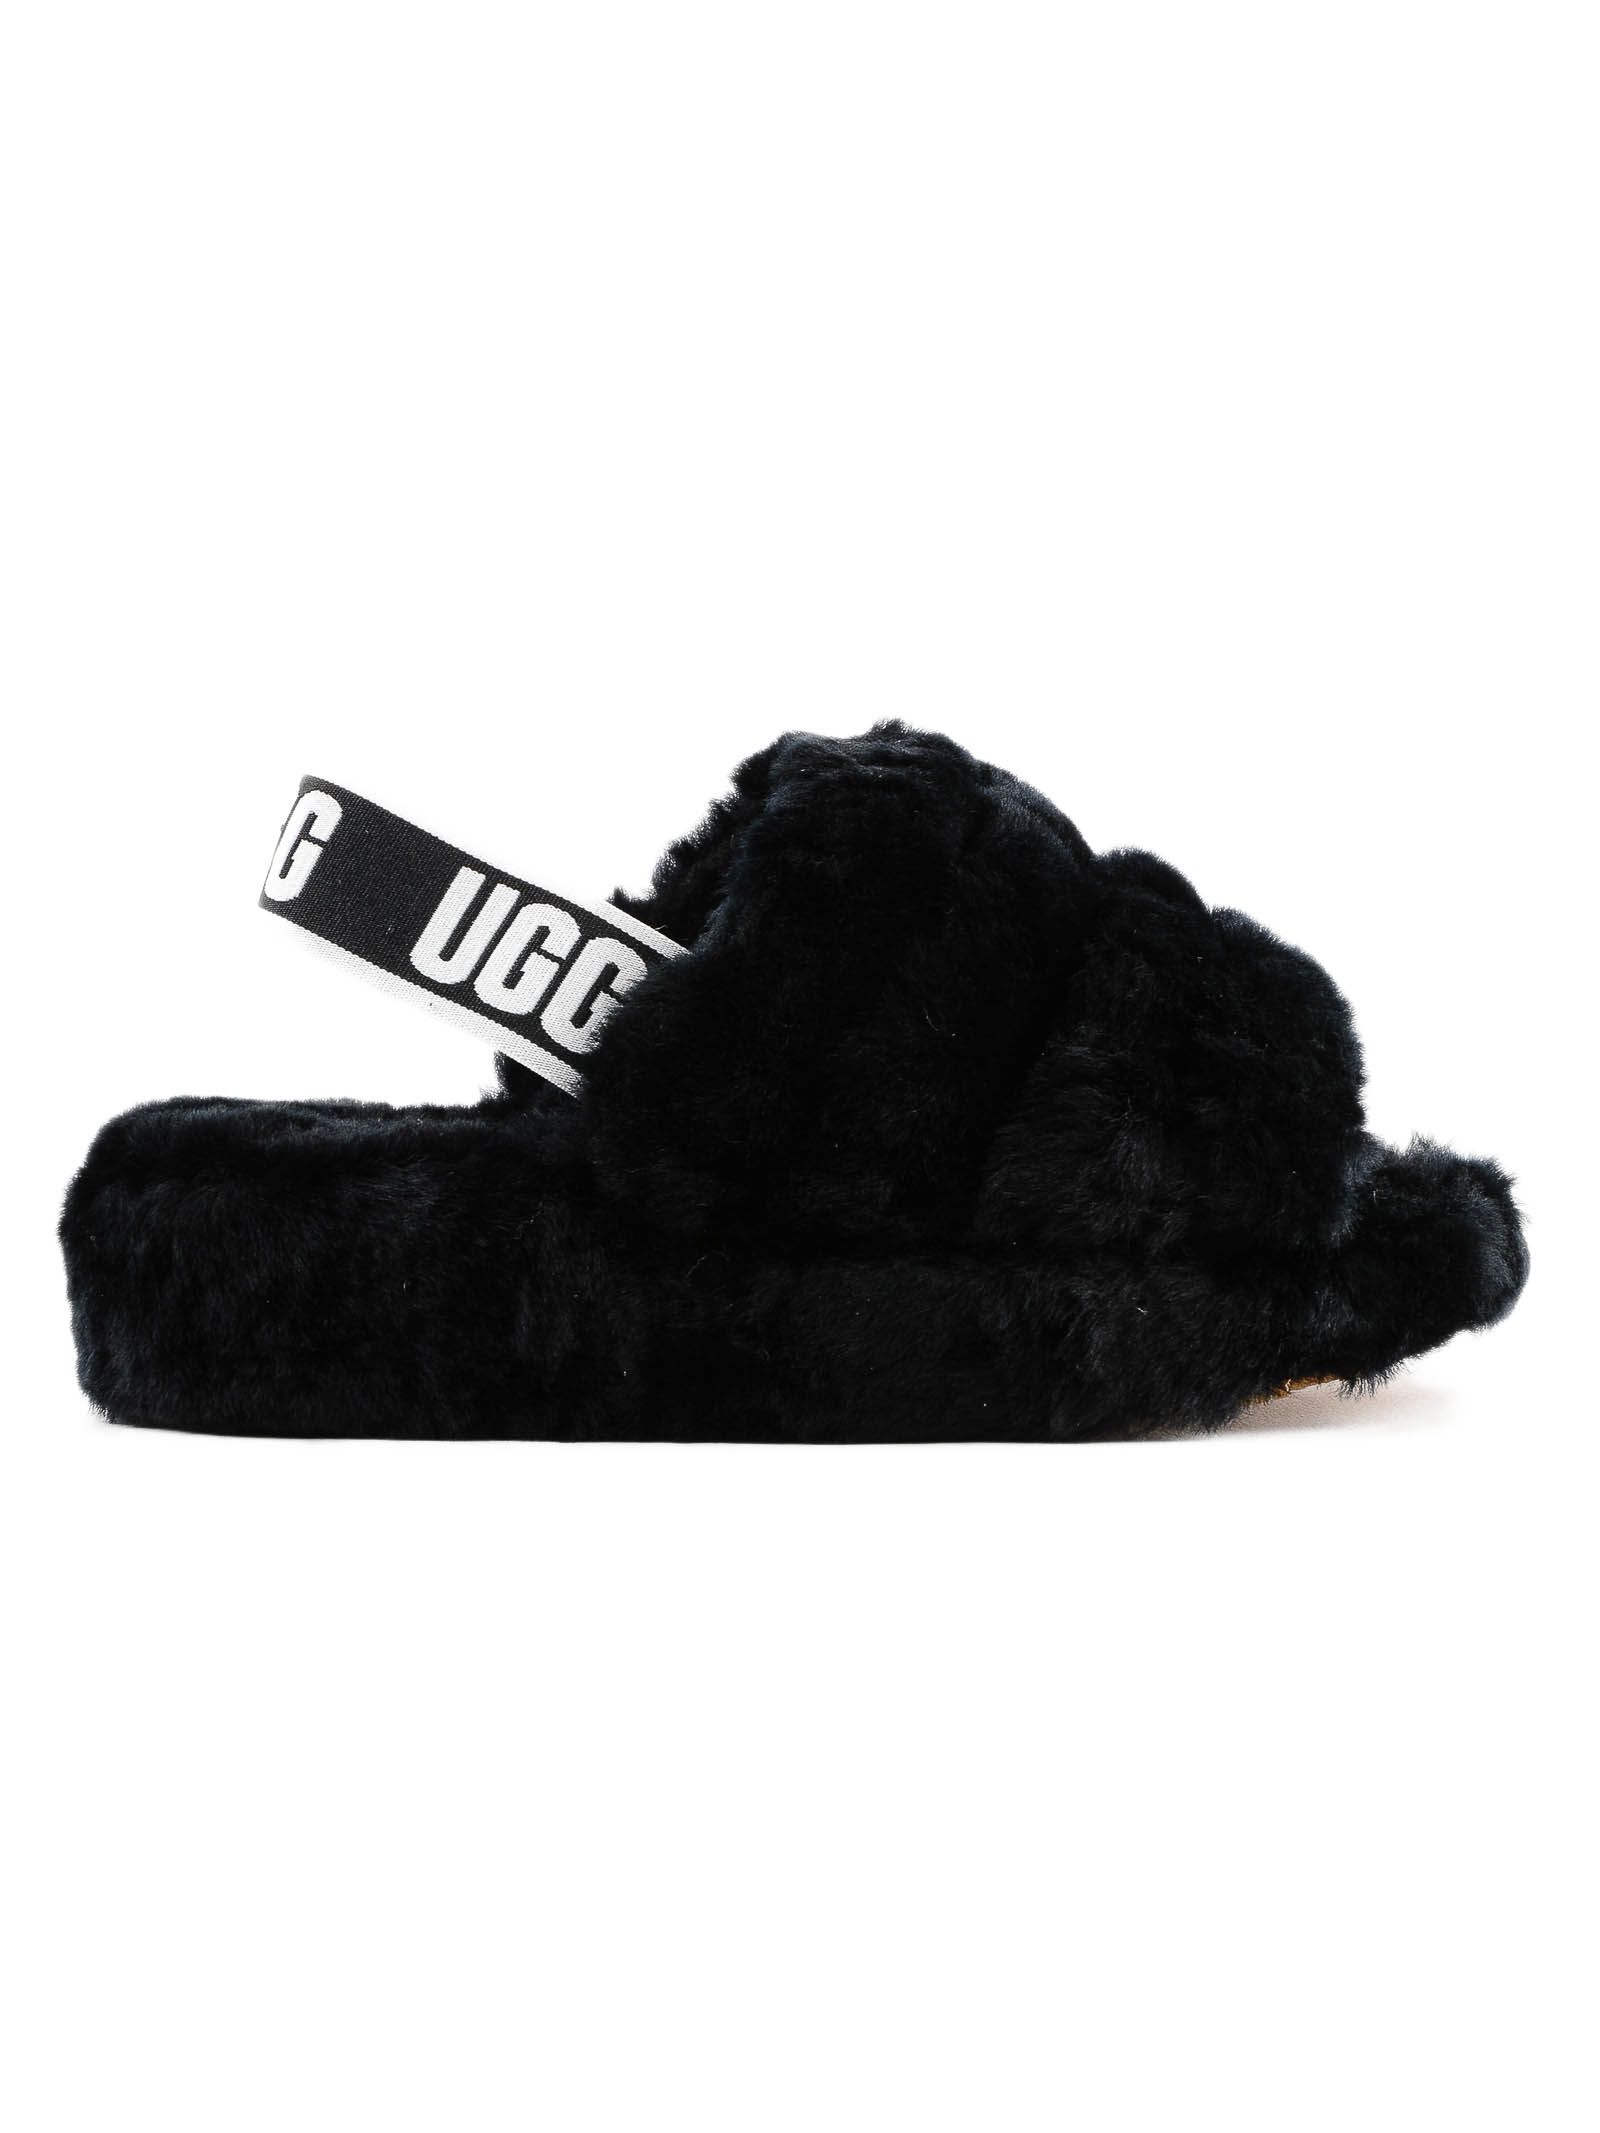 italist | Best price in the market for UGG Ugg Fluff Yeah Sliders ...